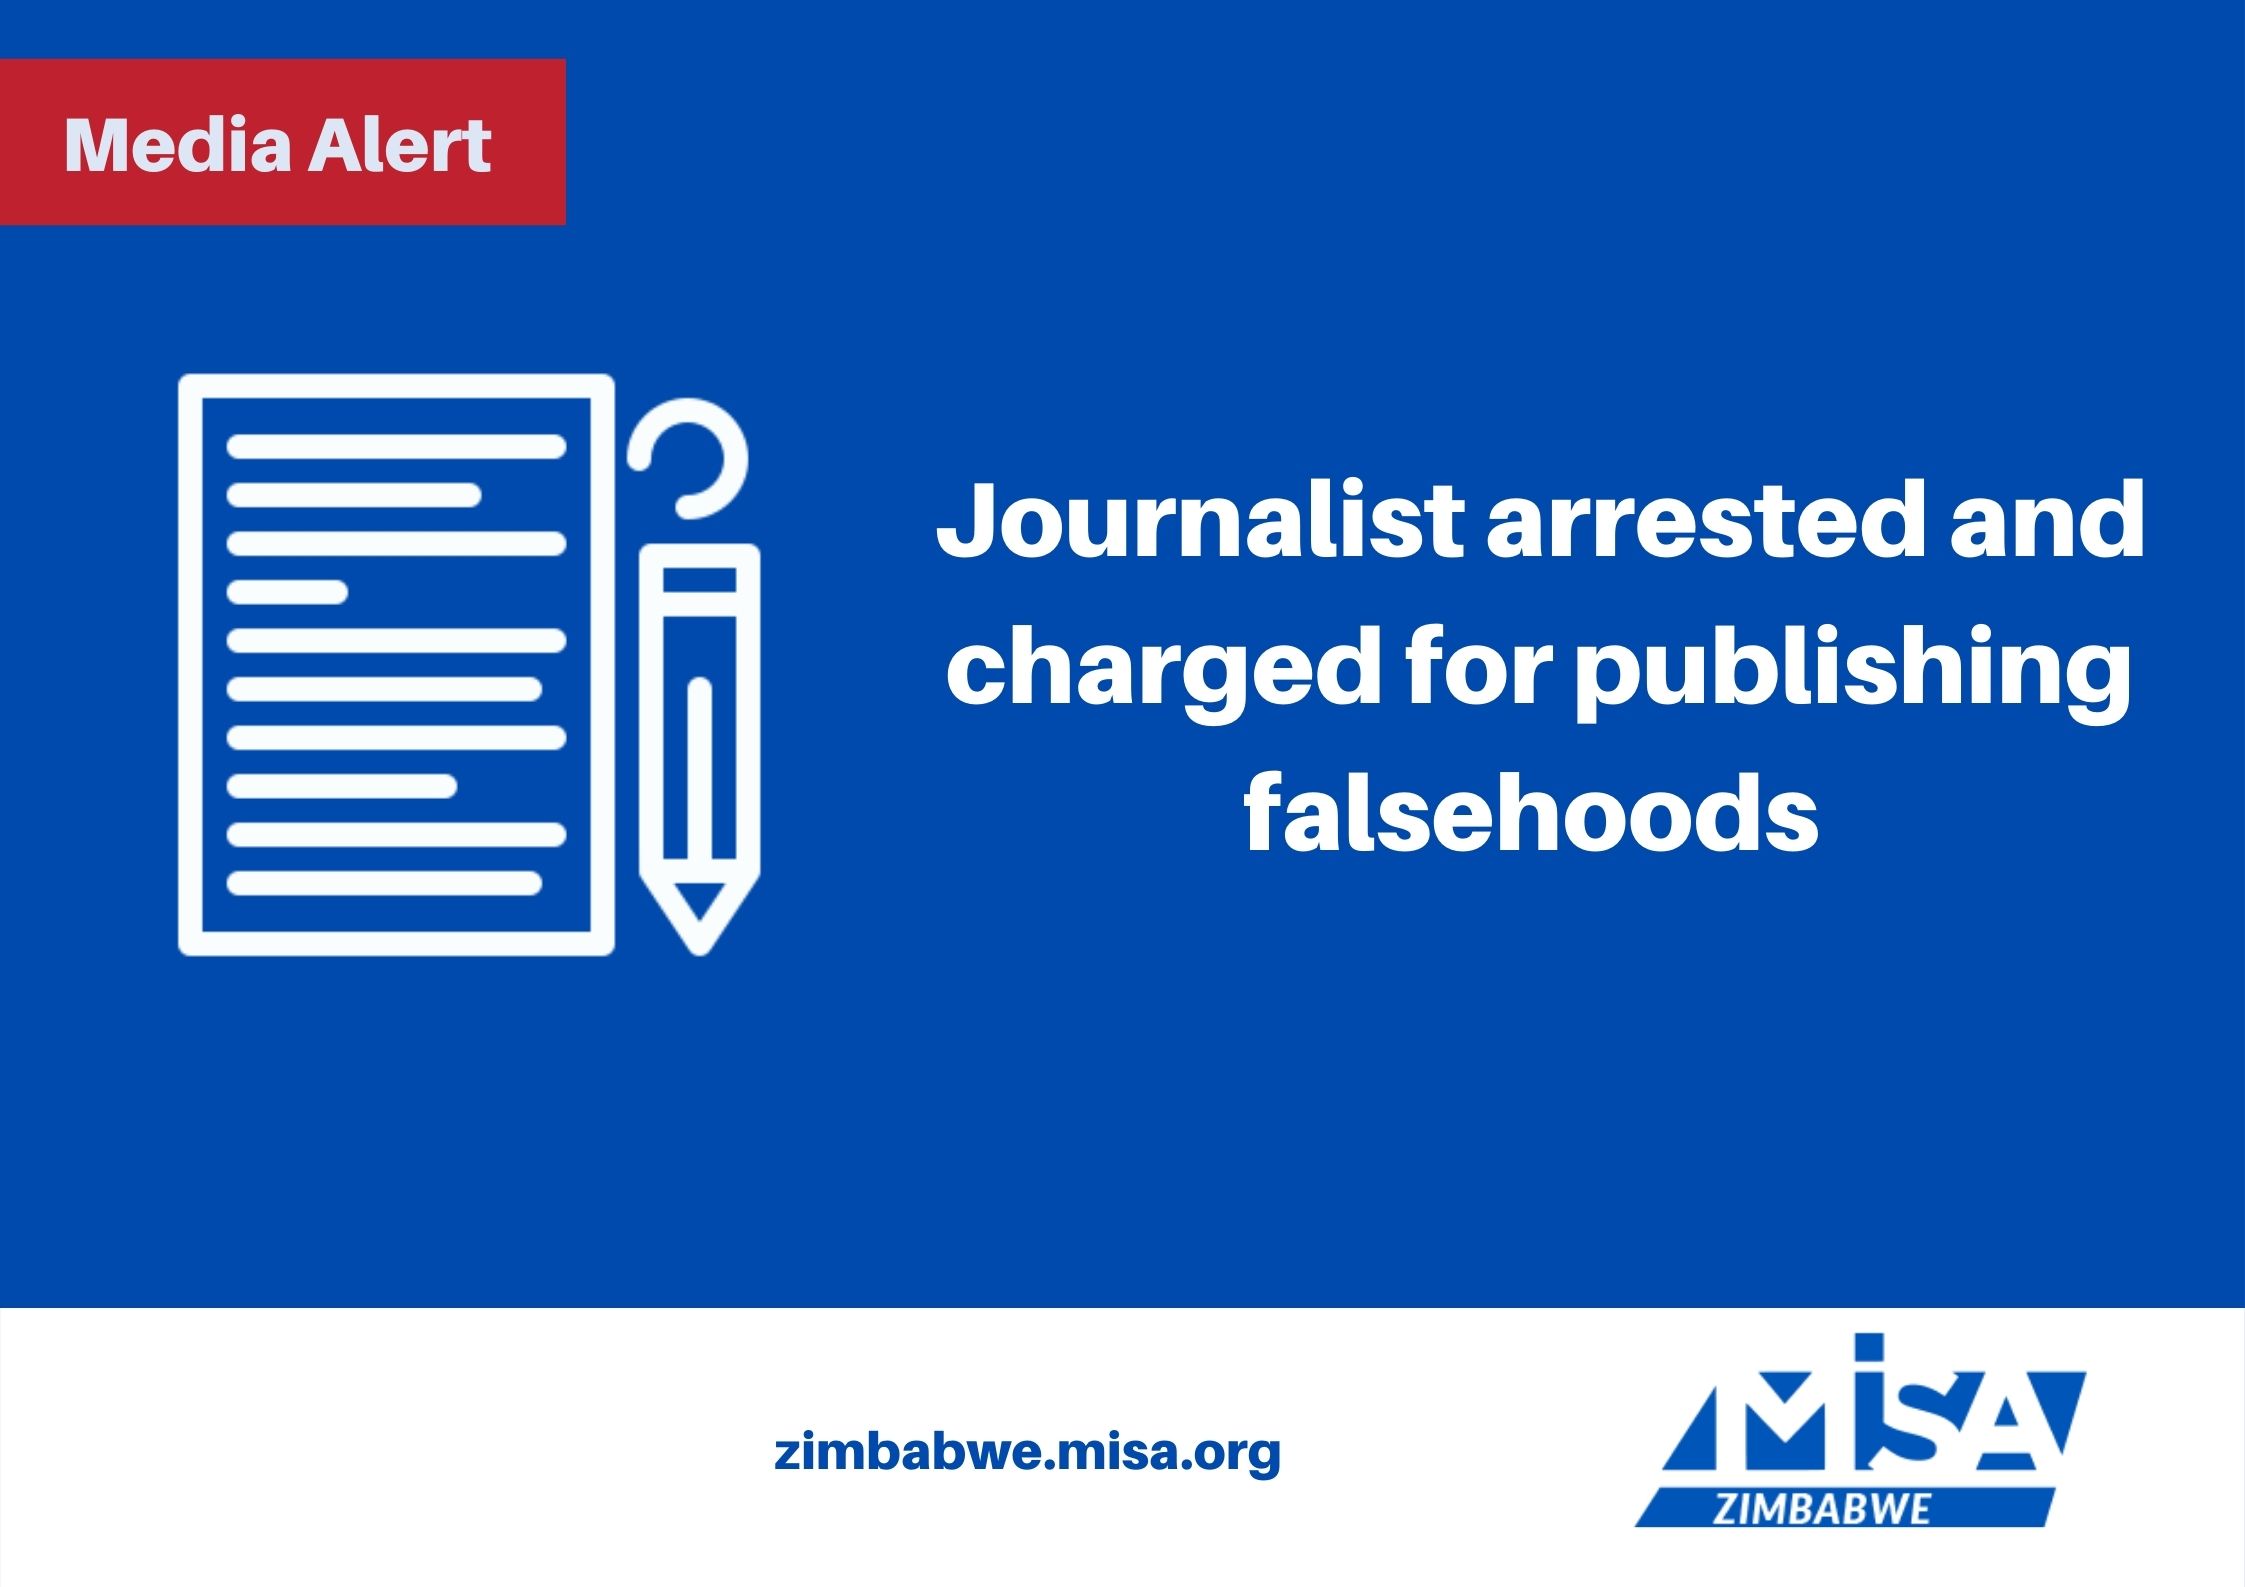 Journalist arrested and charged for publishing falsehoods 